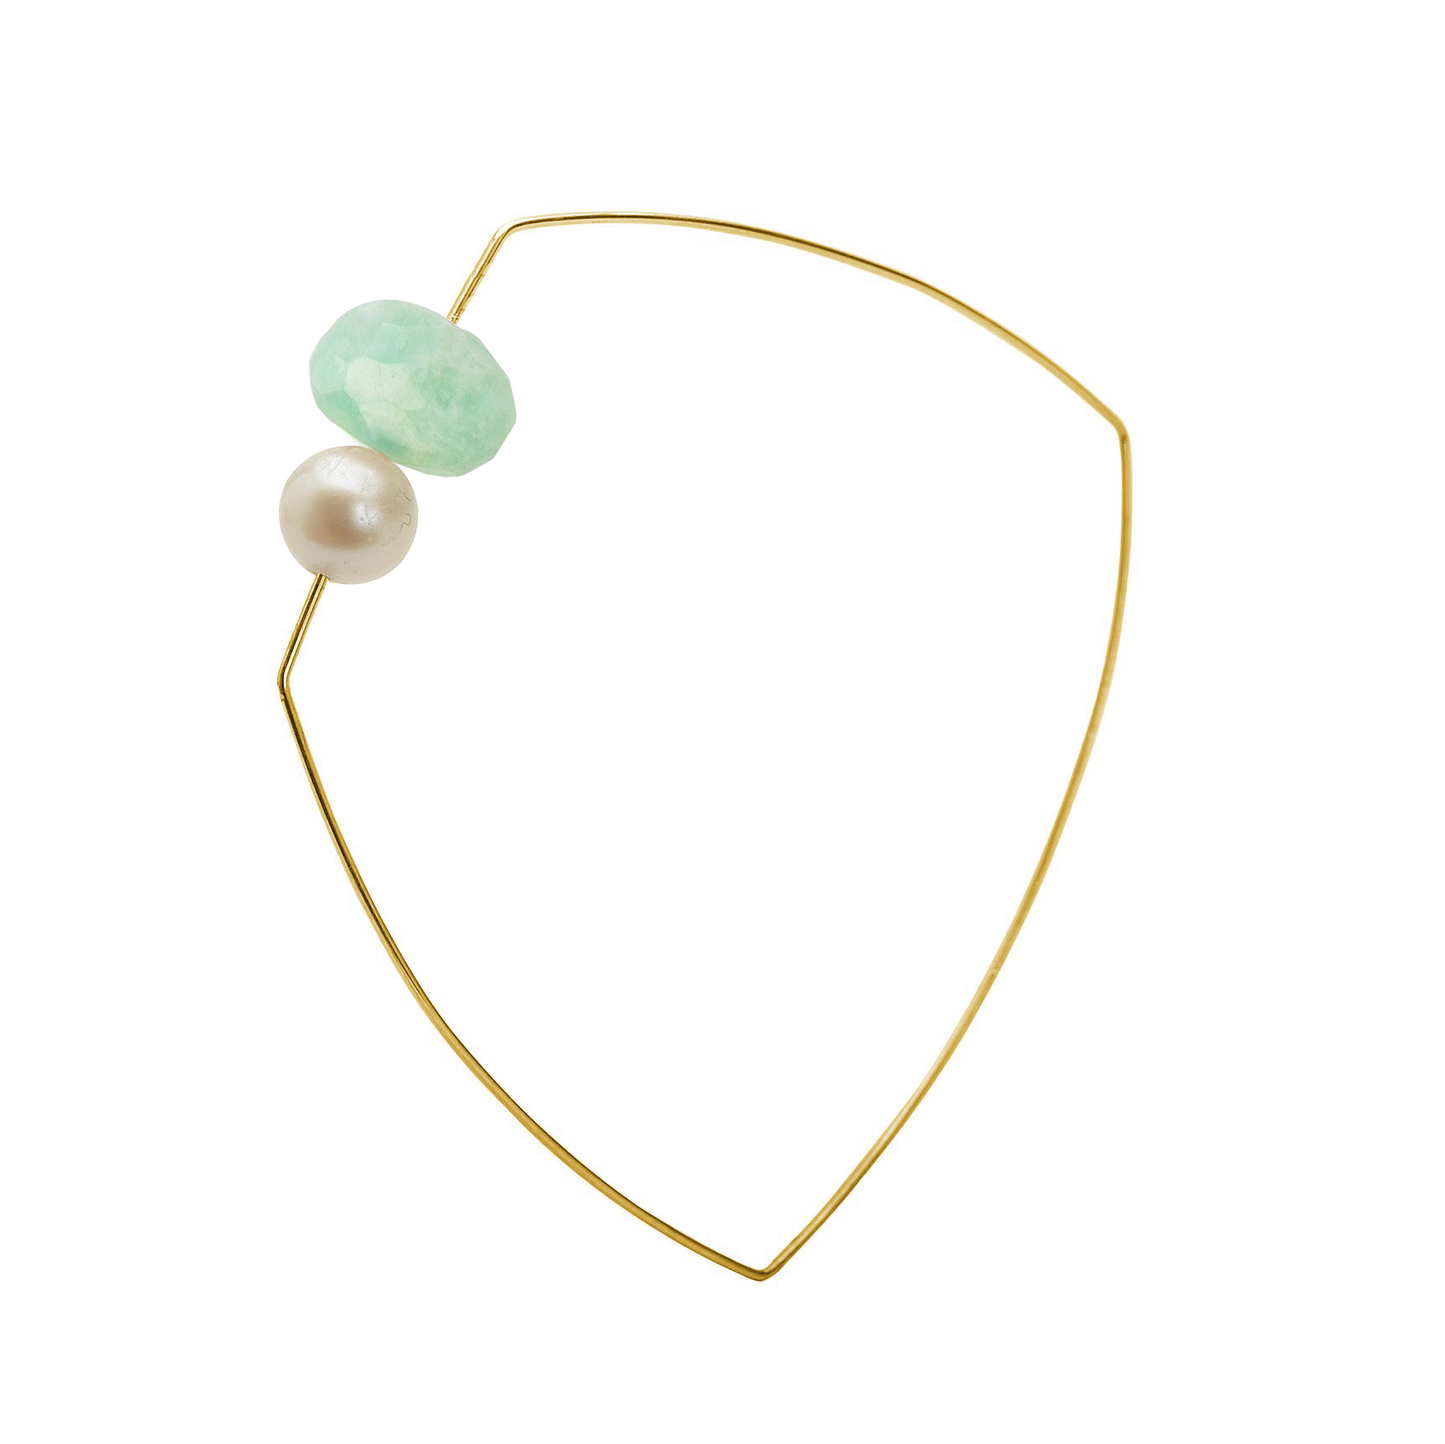 Asymmetric Square Bangle with White Freshwater Pearl and hand-cut precious gemstone